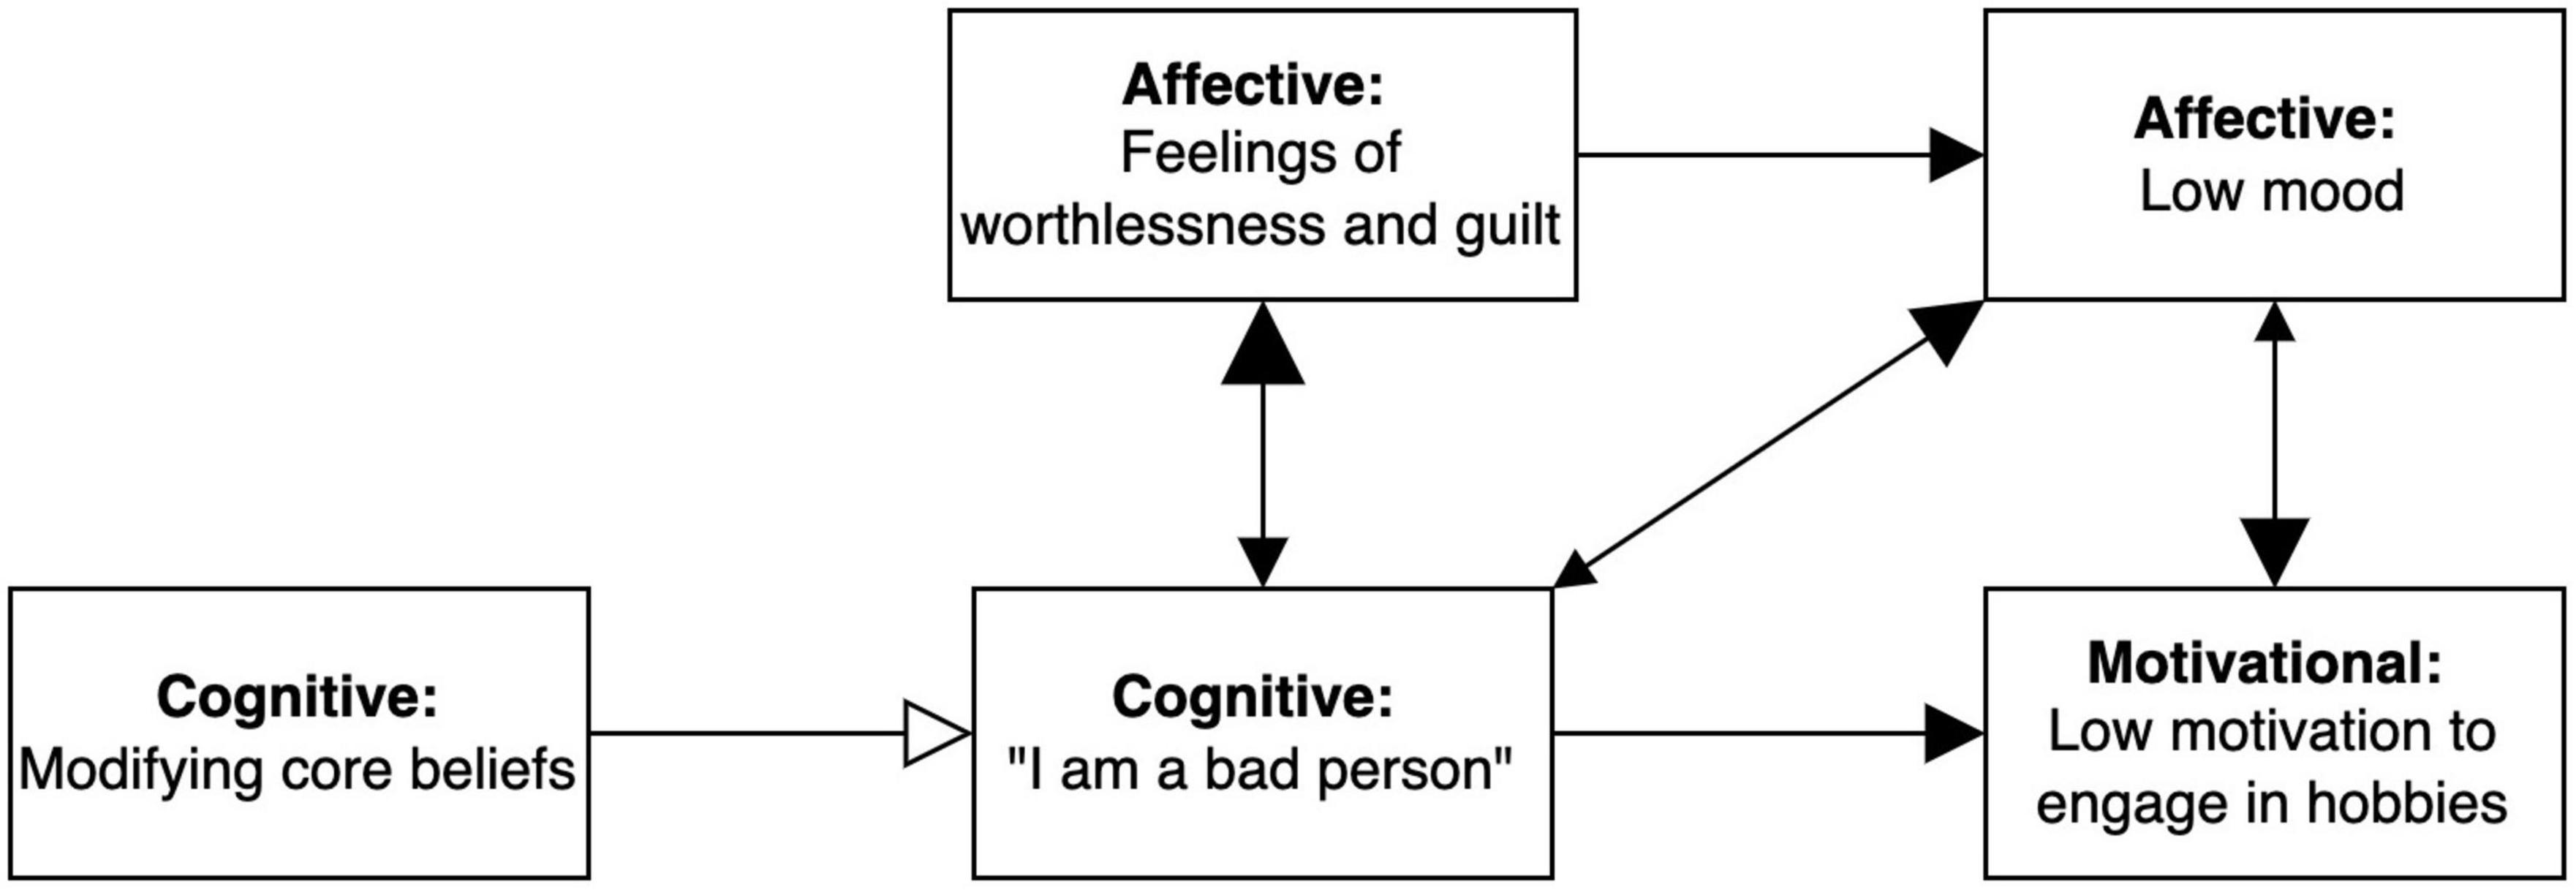 Frontiers A Process Based Approach To Cognitive Behavioral Therapy A Theory Based Case Illustration